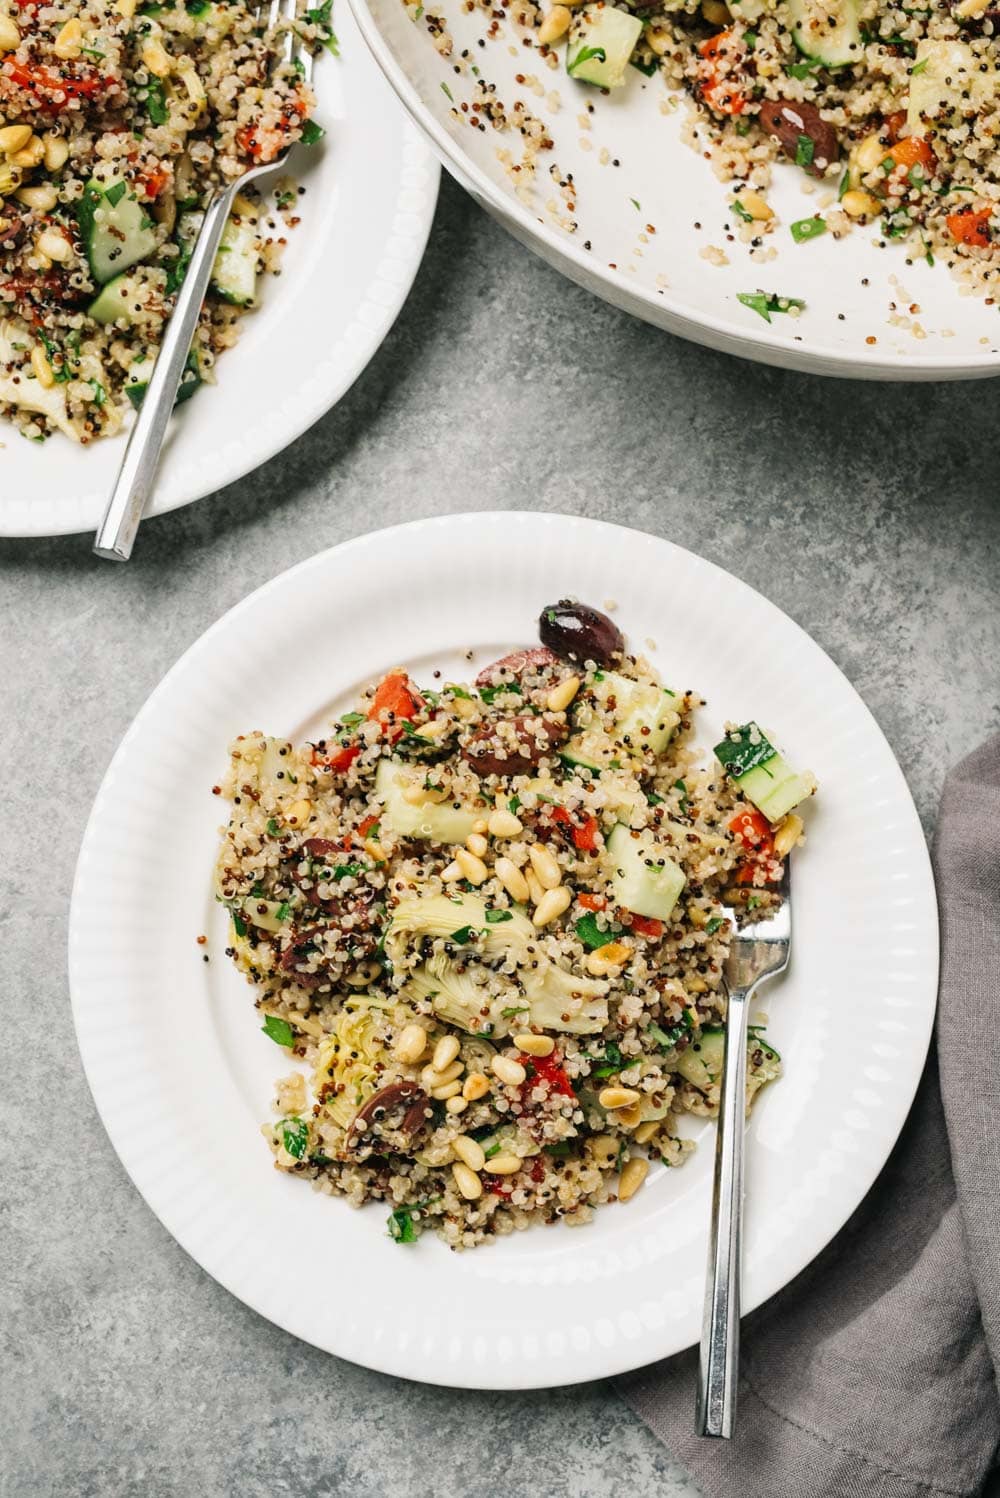 Two servings of mediterranean quinoa salad on a cement background with a grey linen napkin.